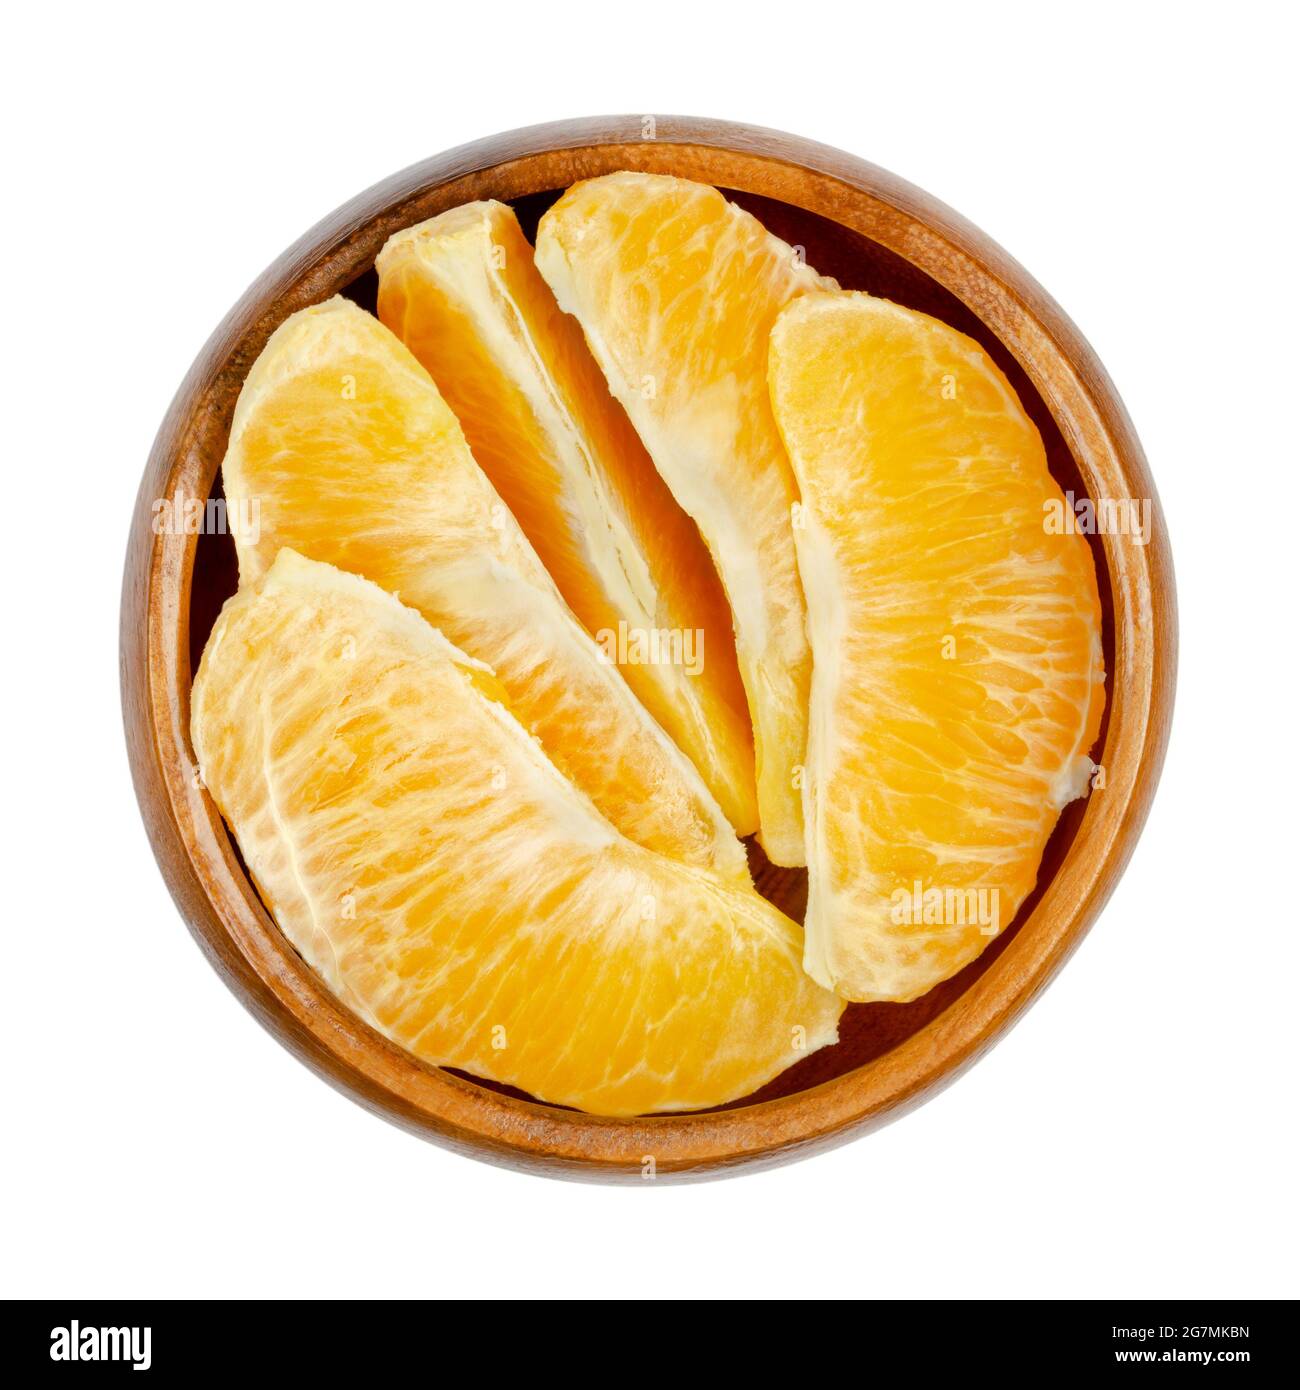 Orange segments, in a wooden bowl. Segments of a peeled Valencia orange. A ripe and sweet fruit with yellow, and juicy fruit flesh. Stock Photo